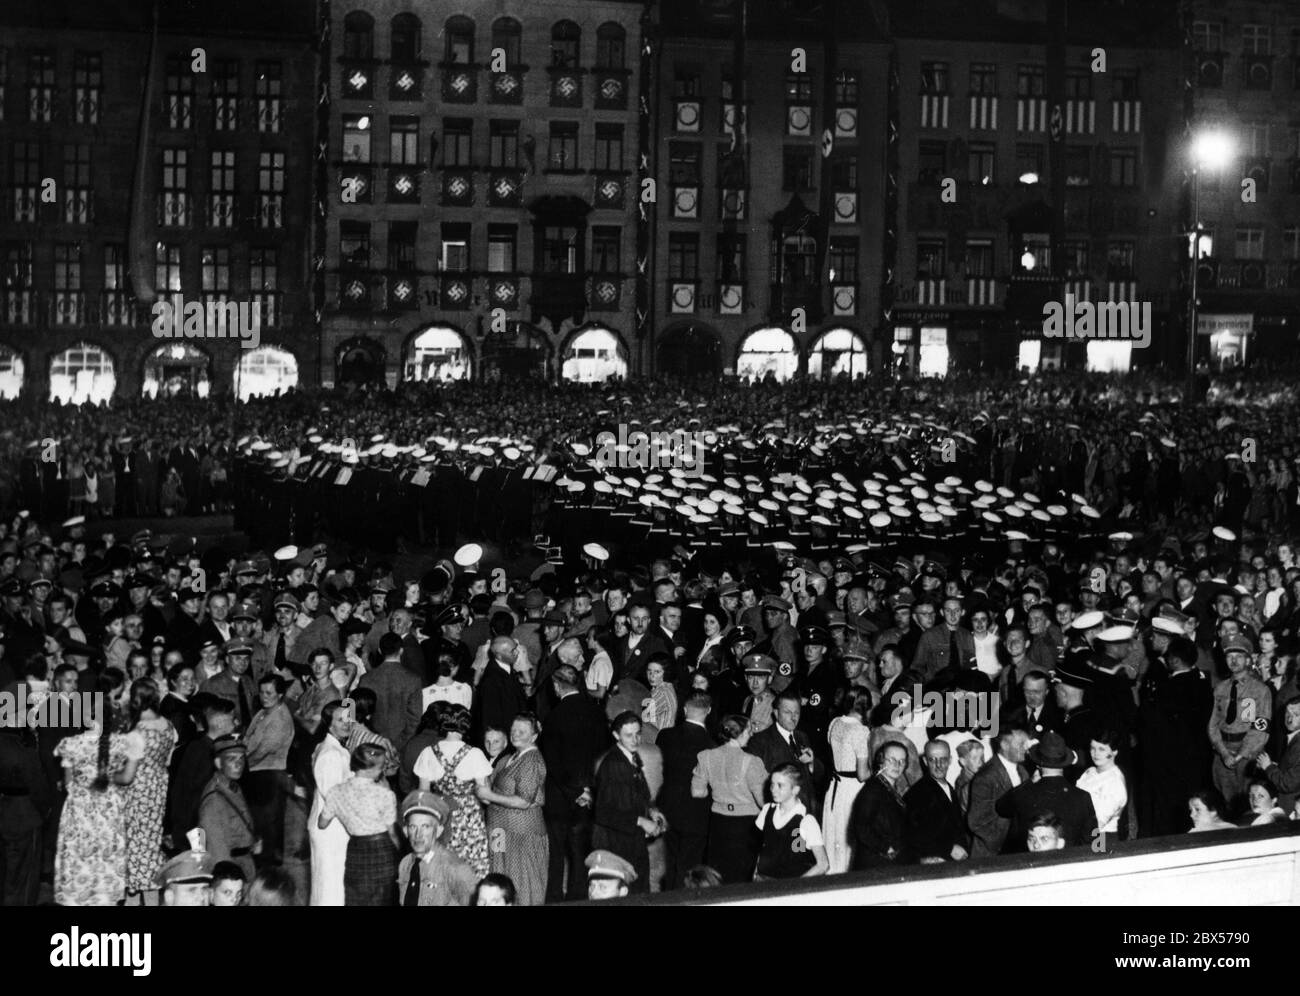 The marching band of the I and II Marineunteroffizierslehrabteilung ('Warrant Officer Training Division') perform in the evening on the so-called Adolf-Hitler-Platz during the Reich Party Congress in Nuremberg. Stock Photo